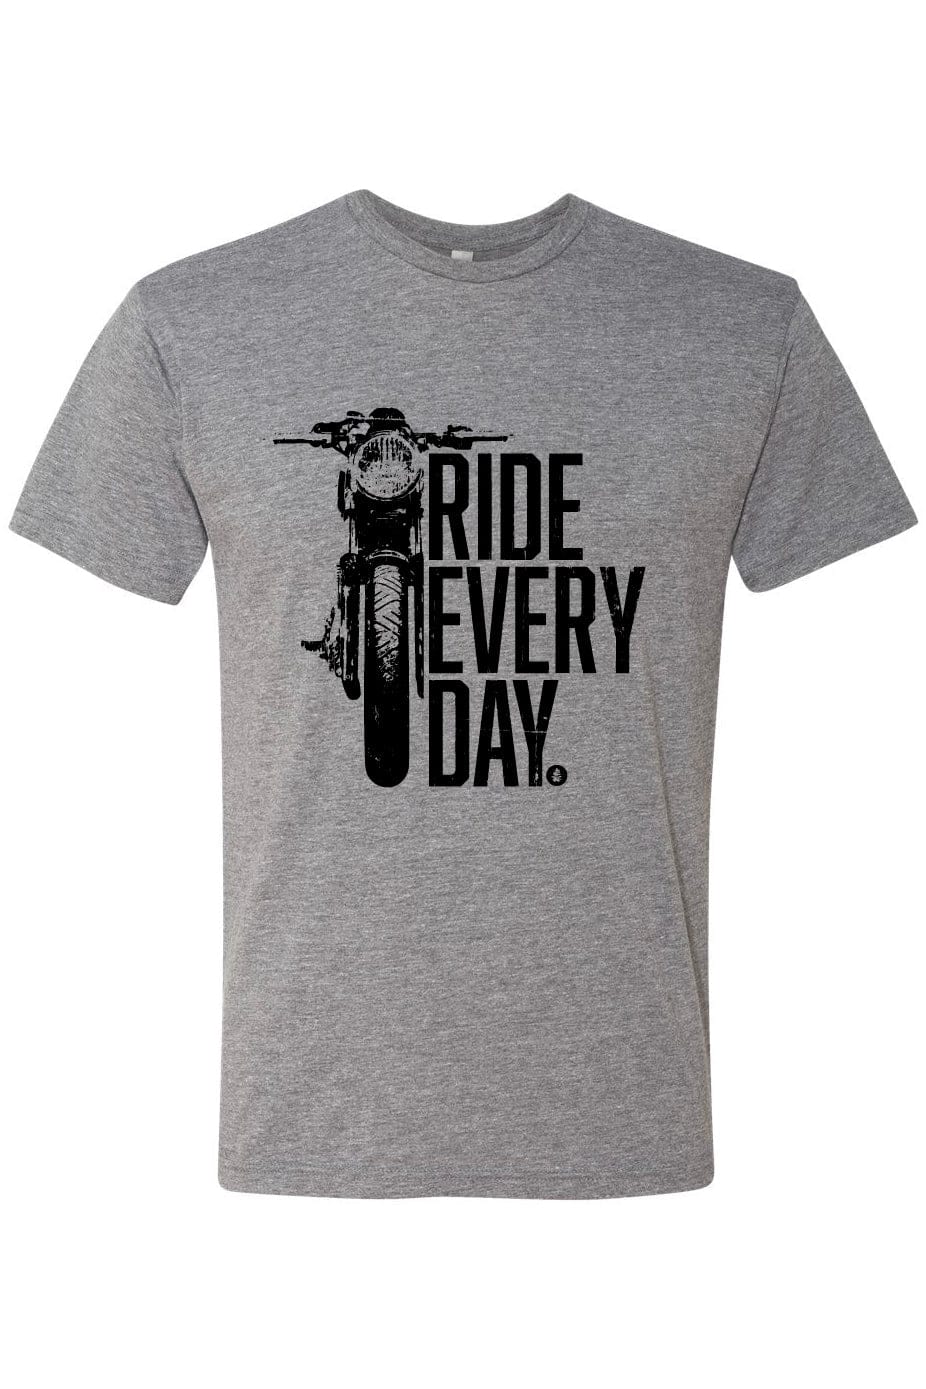 Ride Every Day - Heather Grey